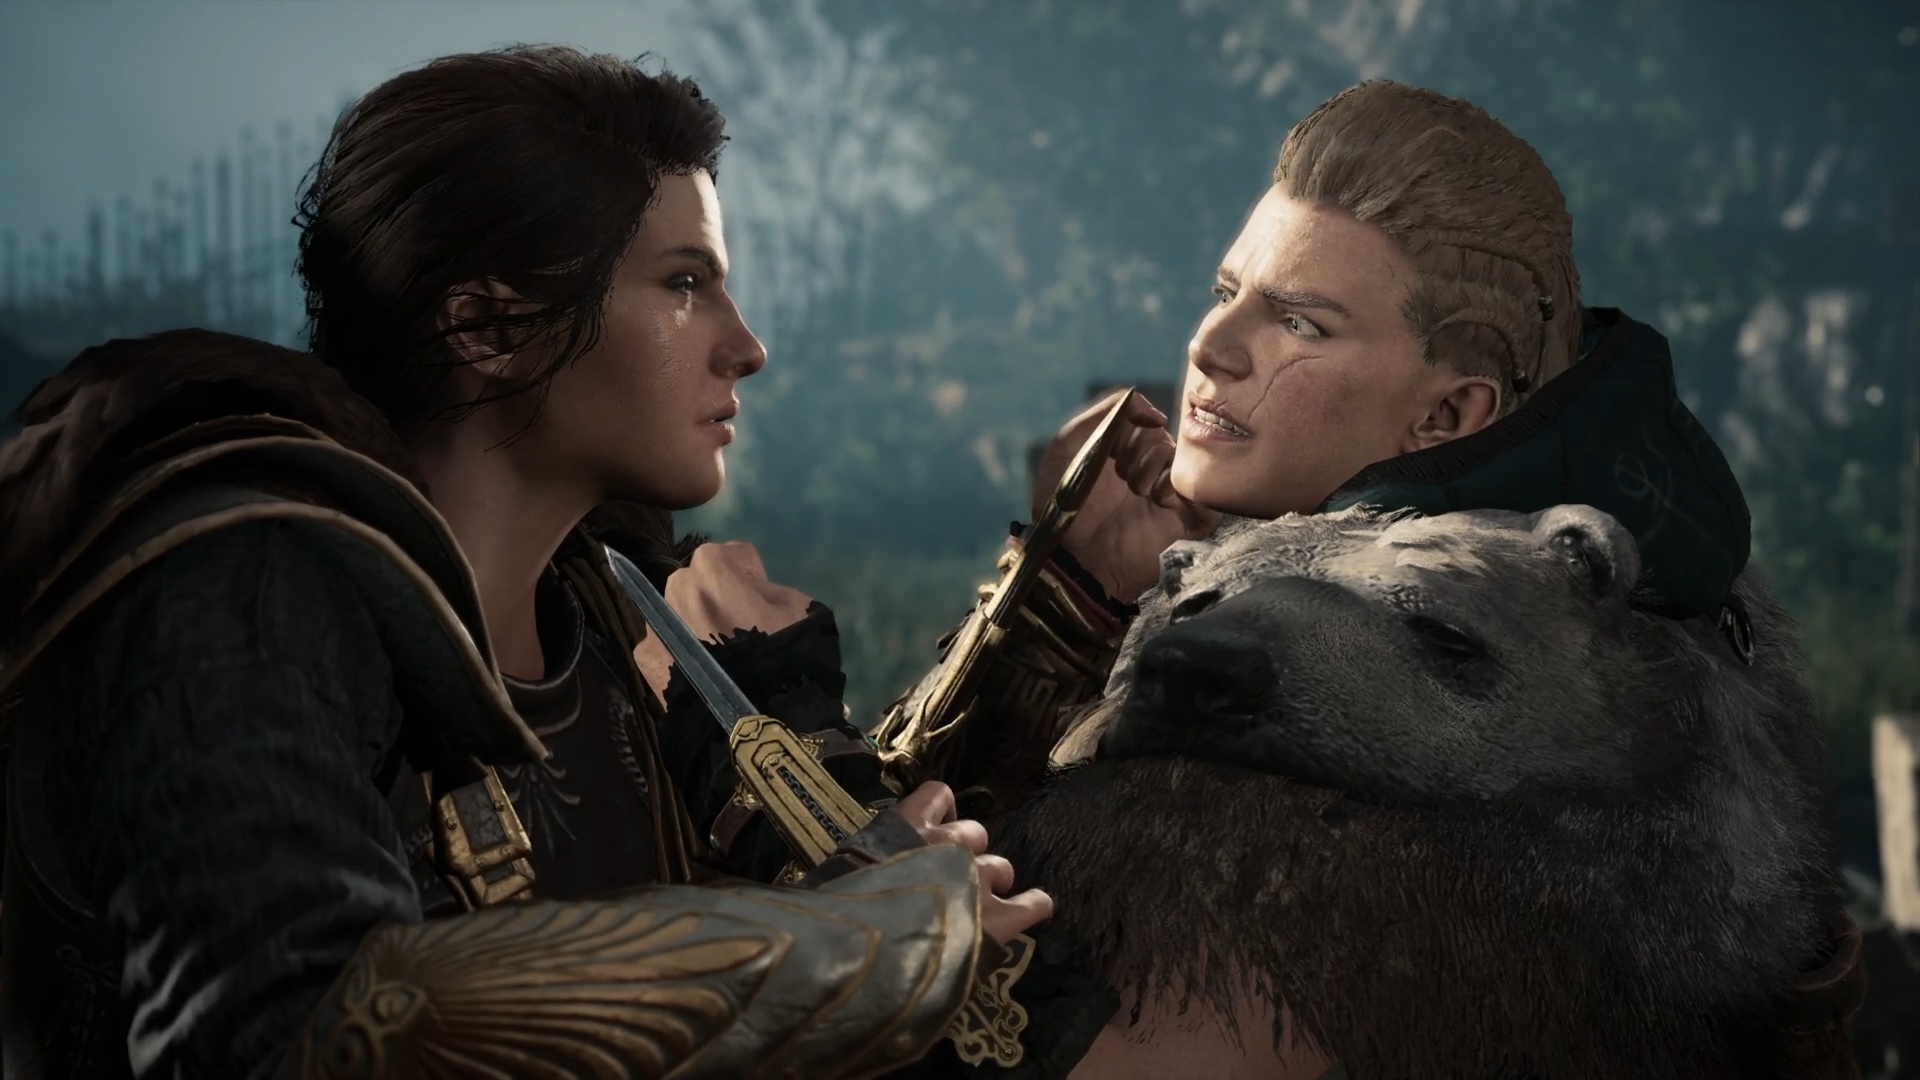 (The encounter with Kassandra is a great moment for fans. The search for an Isu artefact is entertaining, but brings little fundamentally new.)